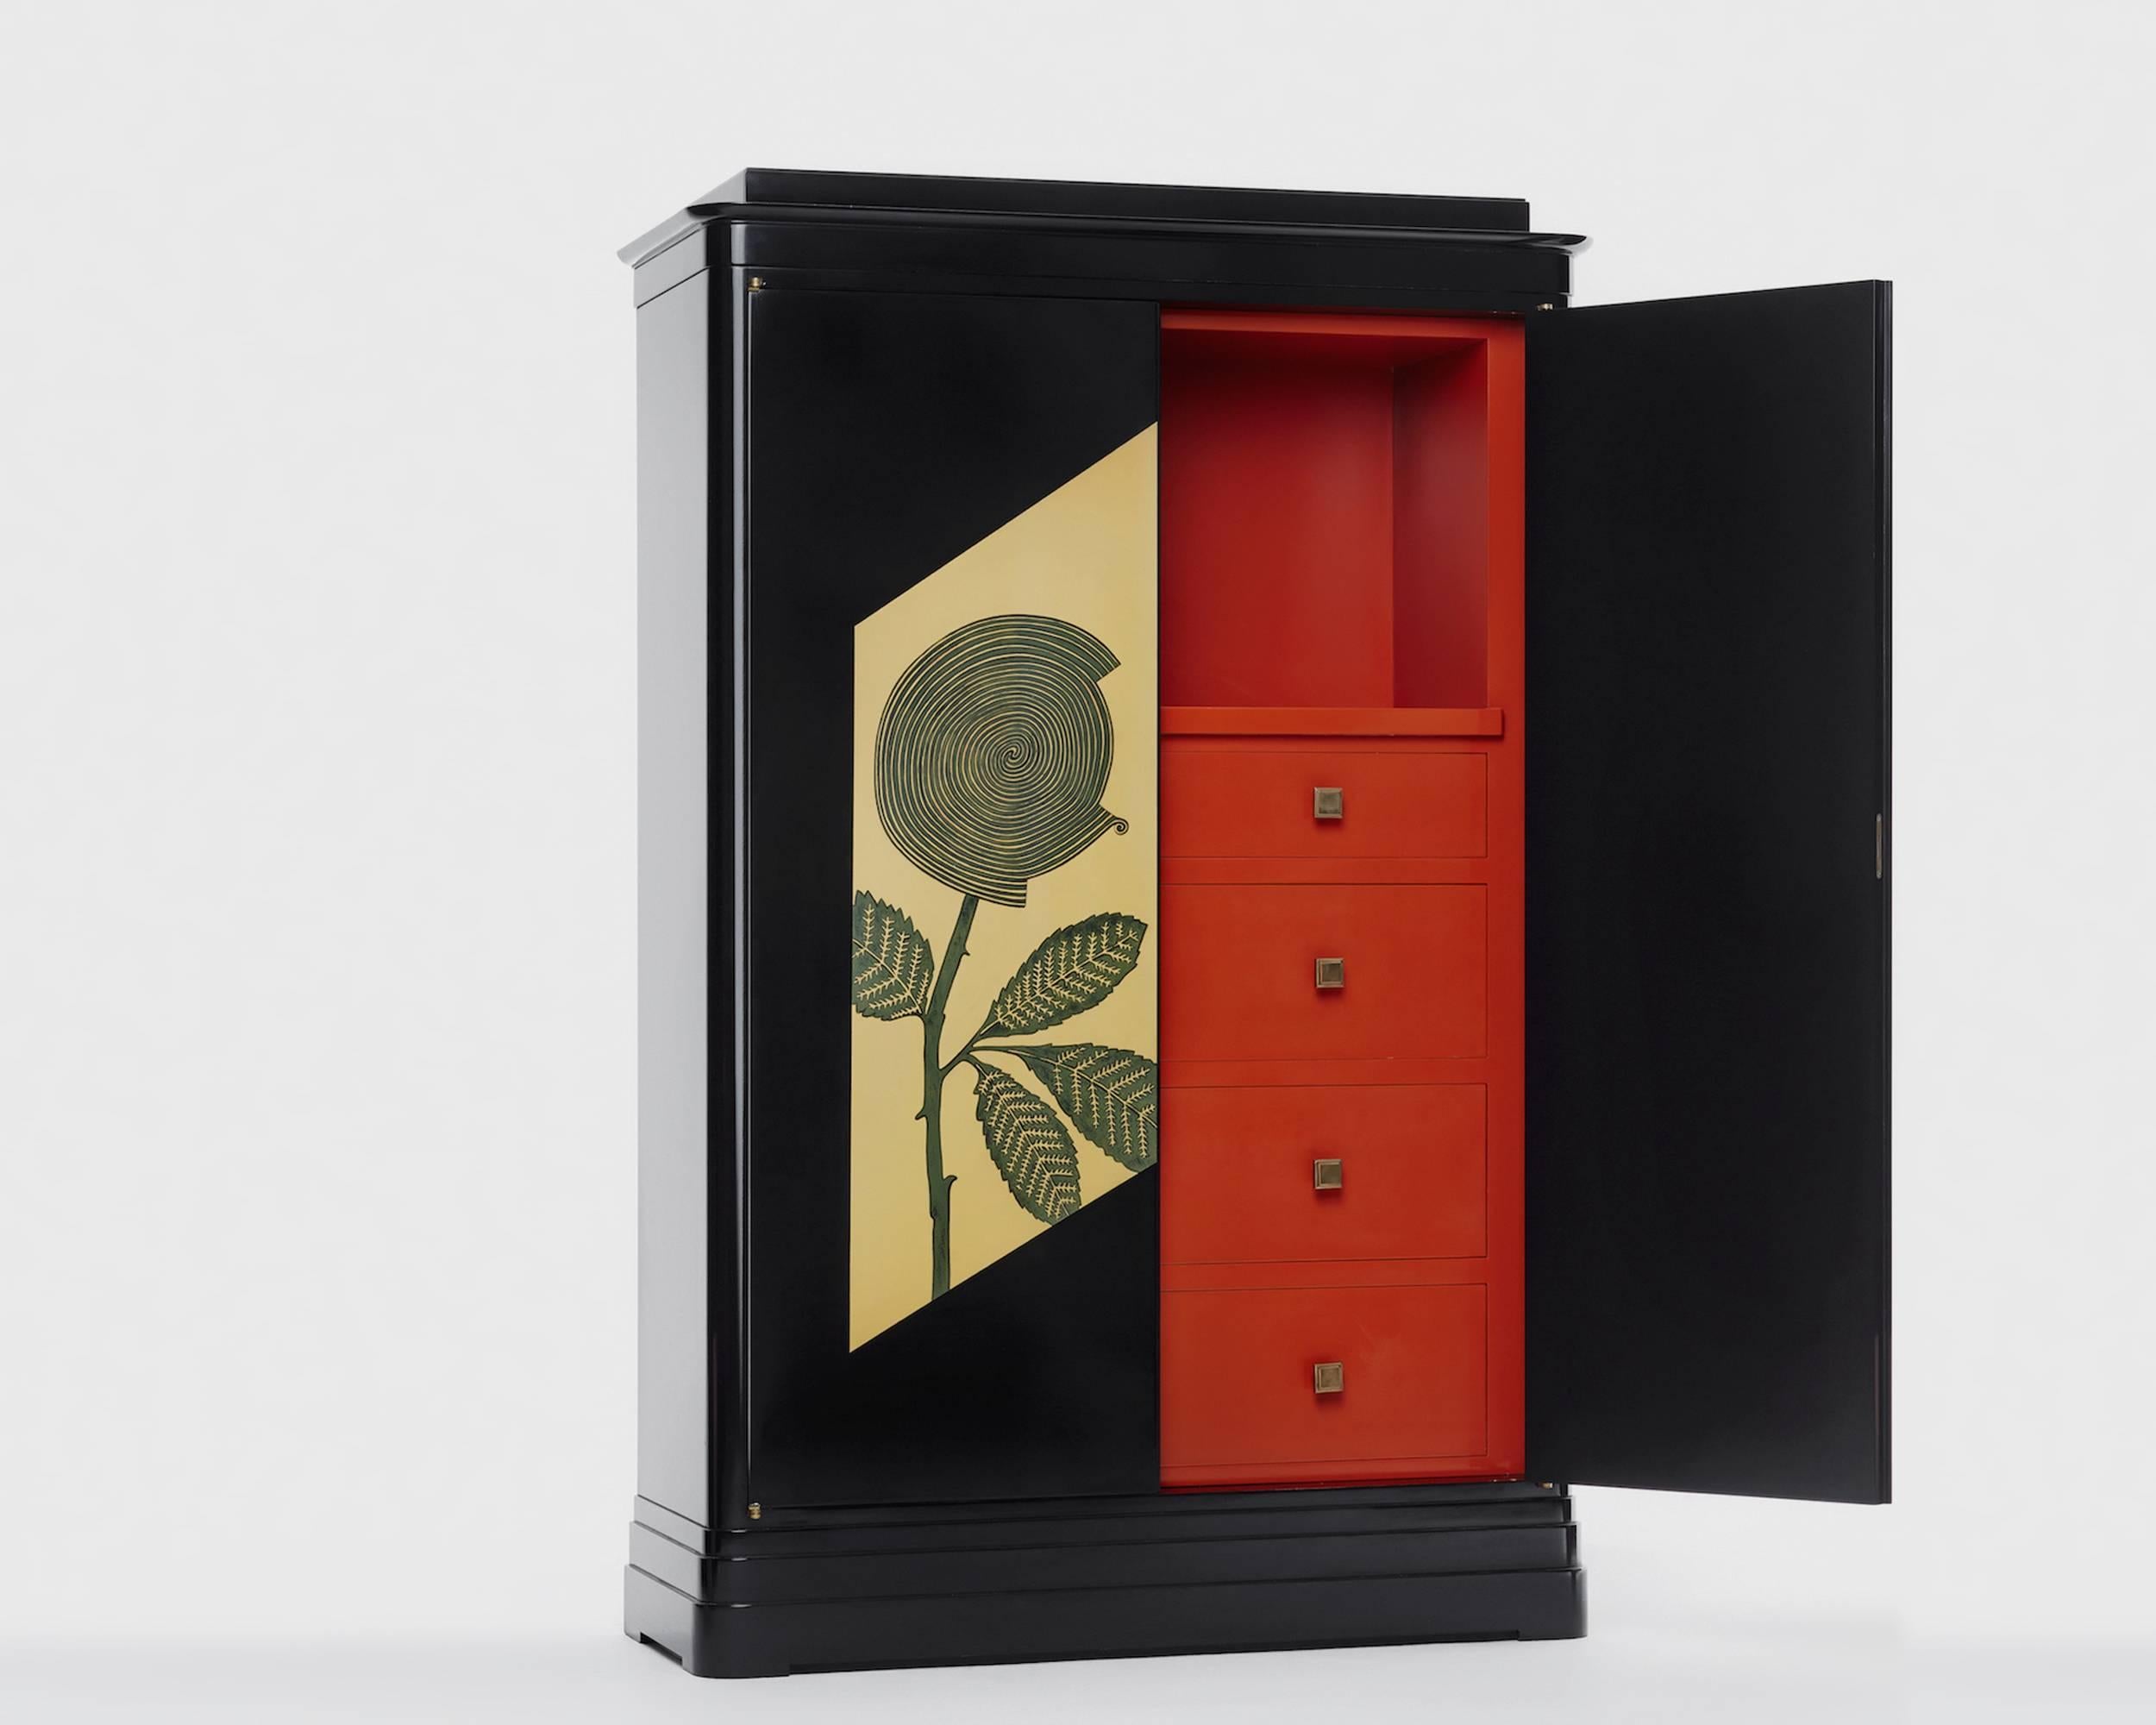 “Art Deco Cabinet” is a storage cabinet by the young Russian designer Dmitry Samygin. With this realization Dmitry pays tribute to the artist Jean Dunand.

Lacquered wood
165 cm x 107 cm x 44 cm

After studying Applied Arts at the National